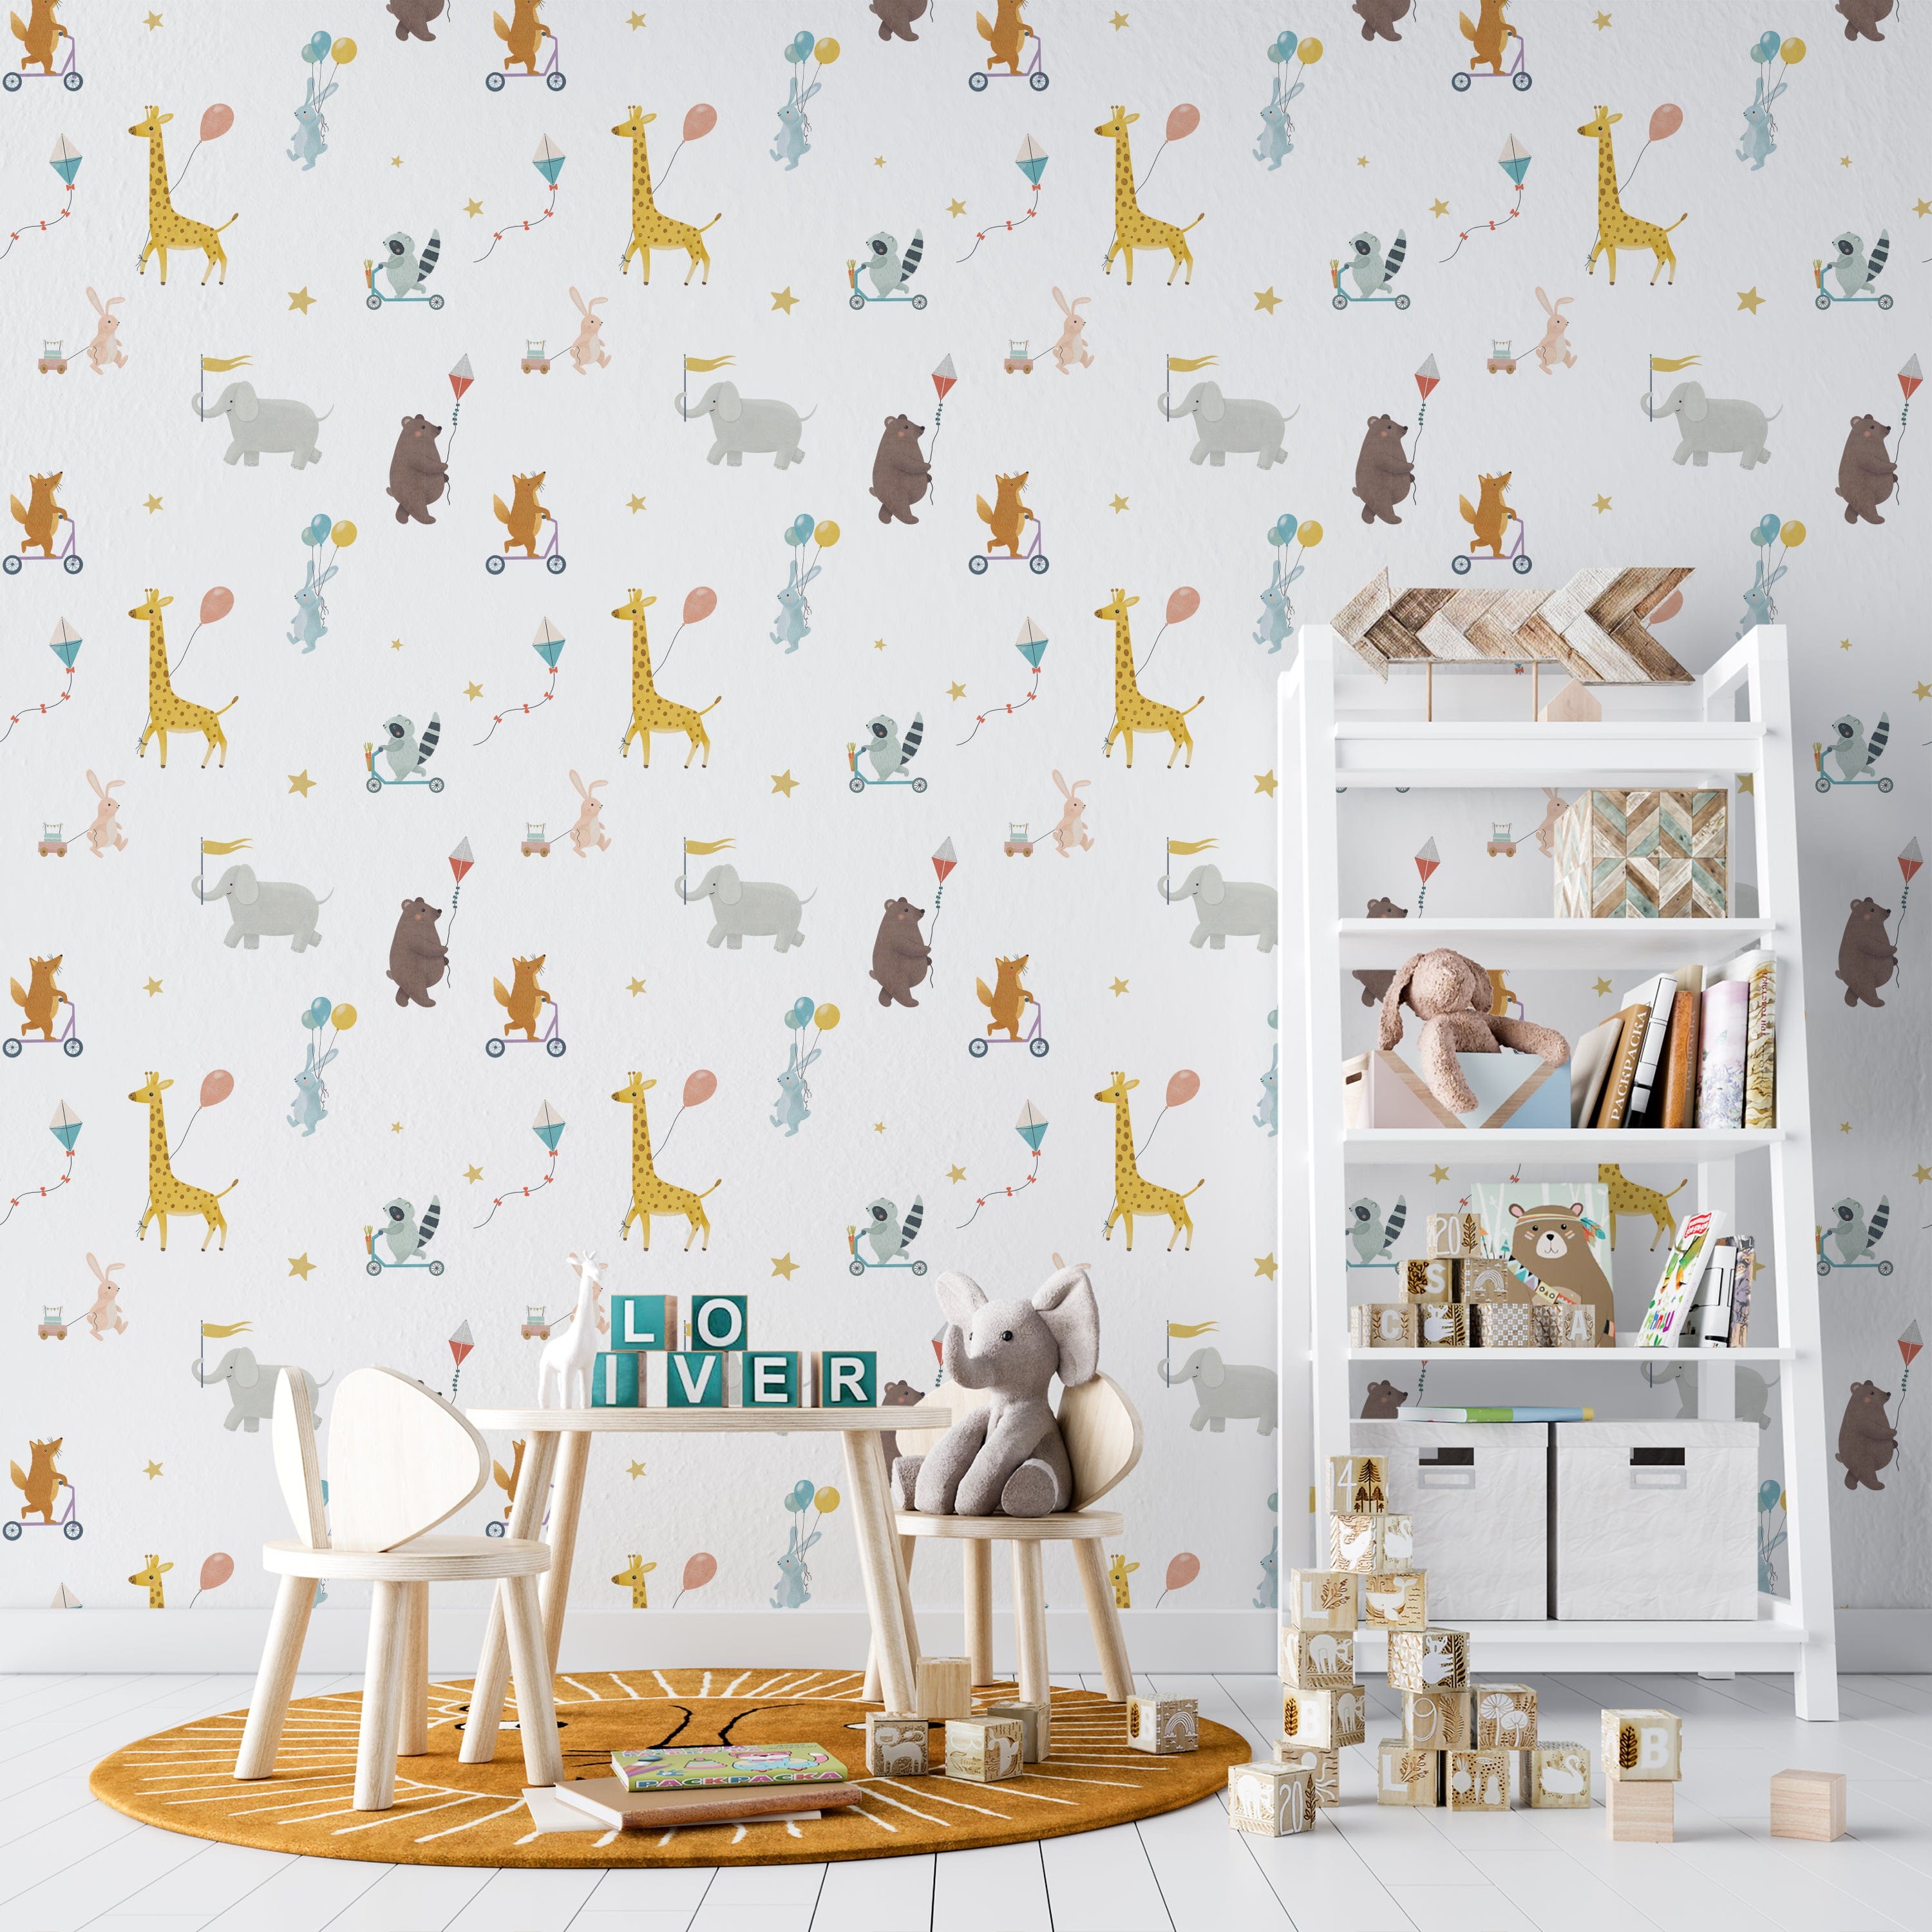 A child's room decorated with the Adventure Wallpaper, showcasing a lively and fun atmosphere. The wallpaper provides a backdrop to a simple wooden table and chairs, with a plush elephant toy on one chair, emphasizing the room's whimsical and youthful theme.